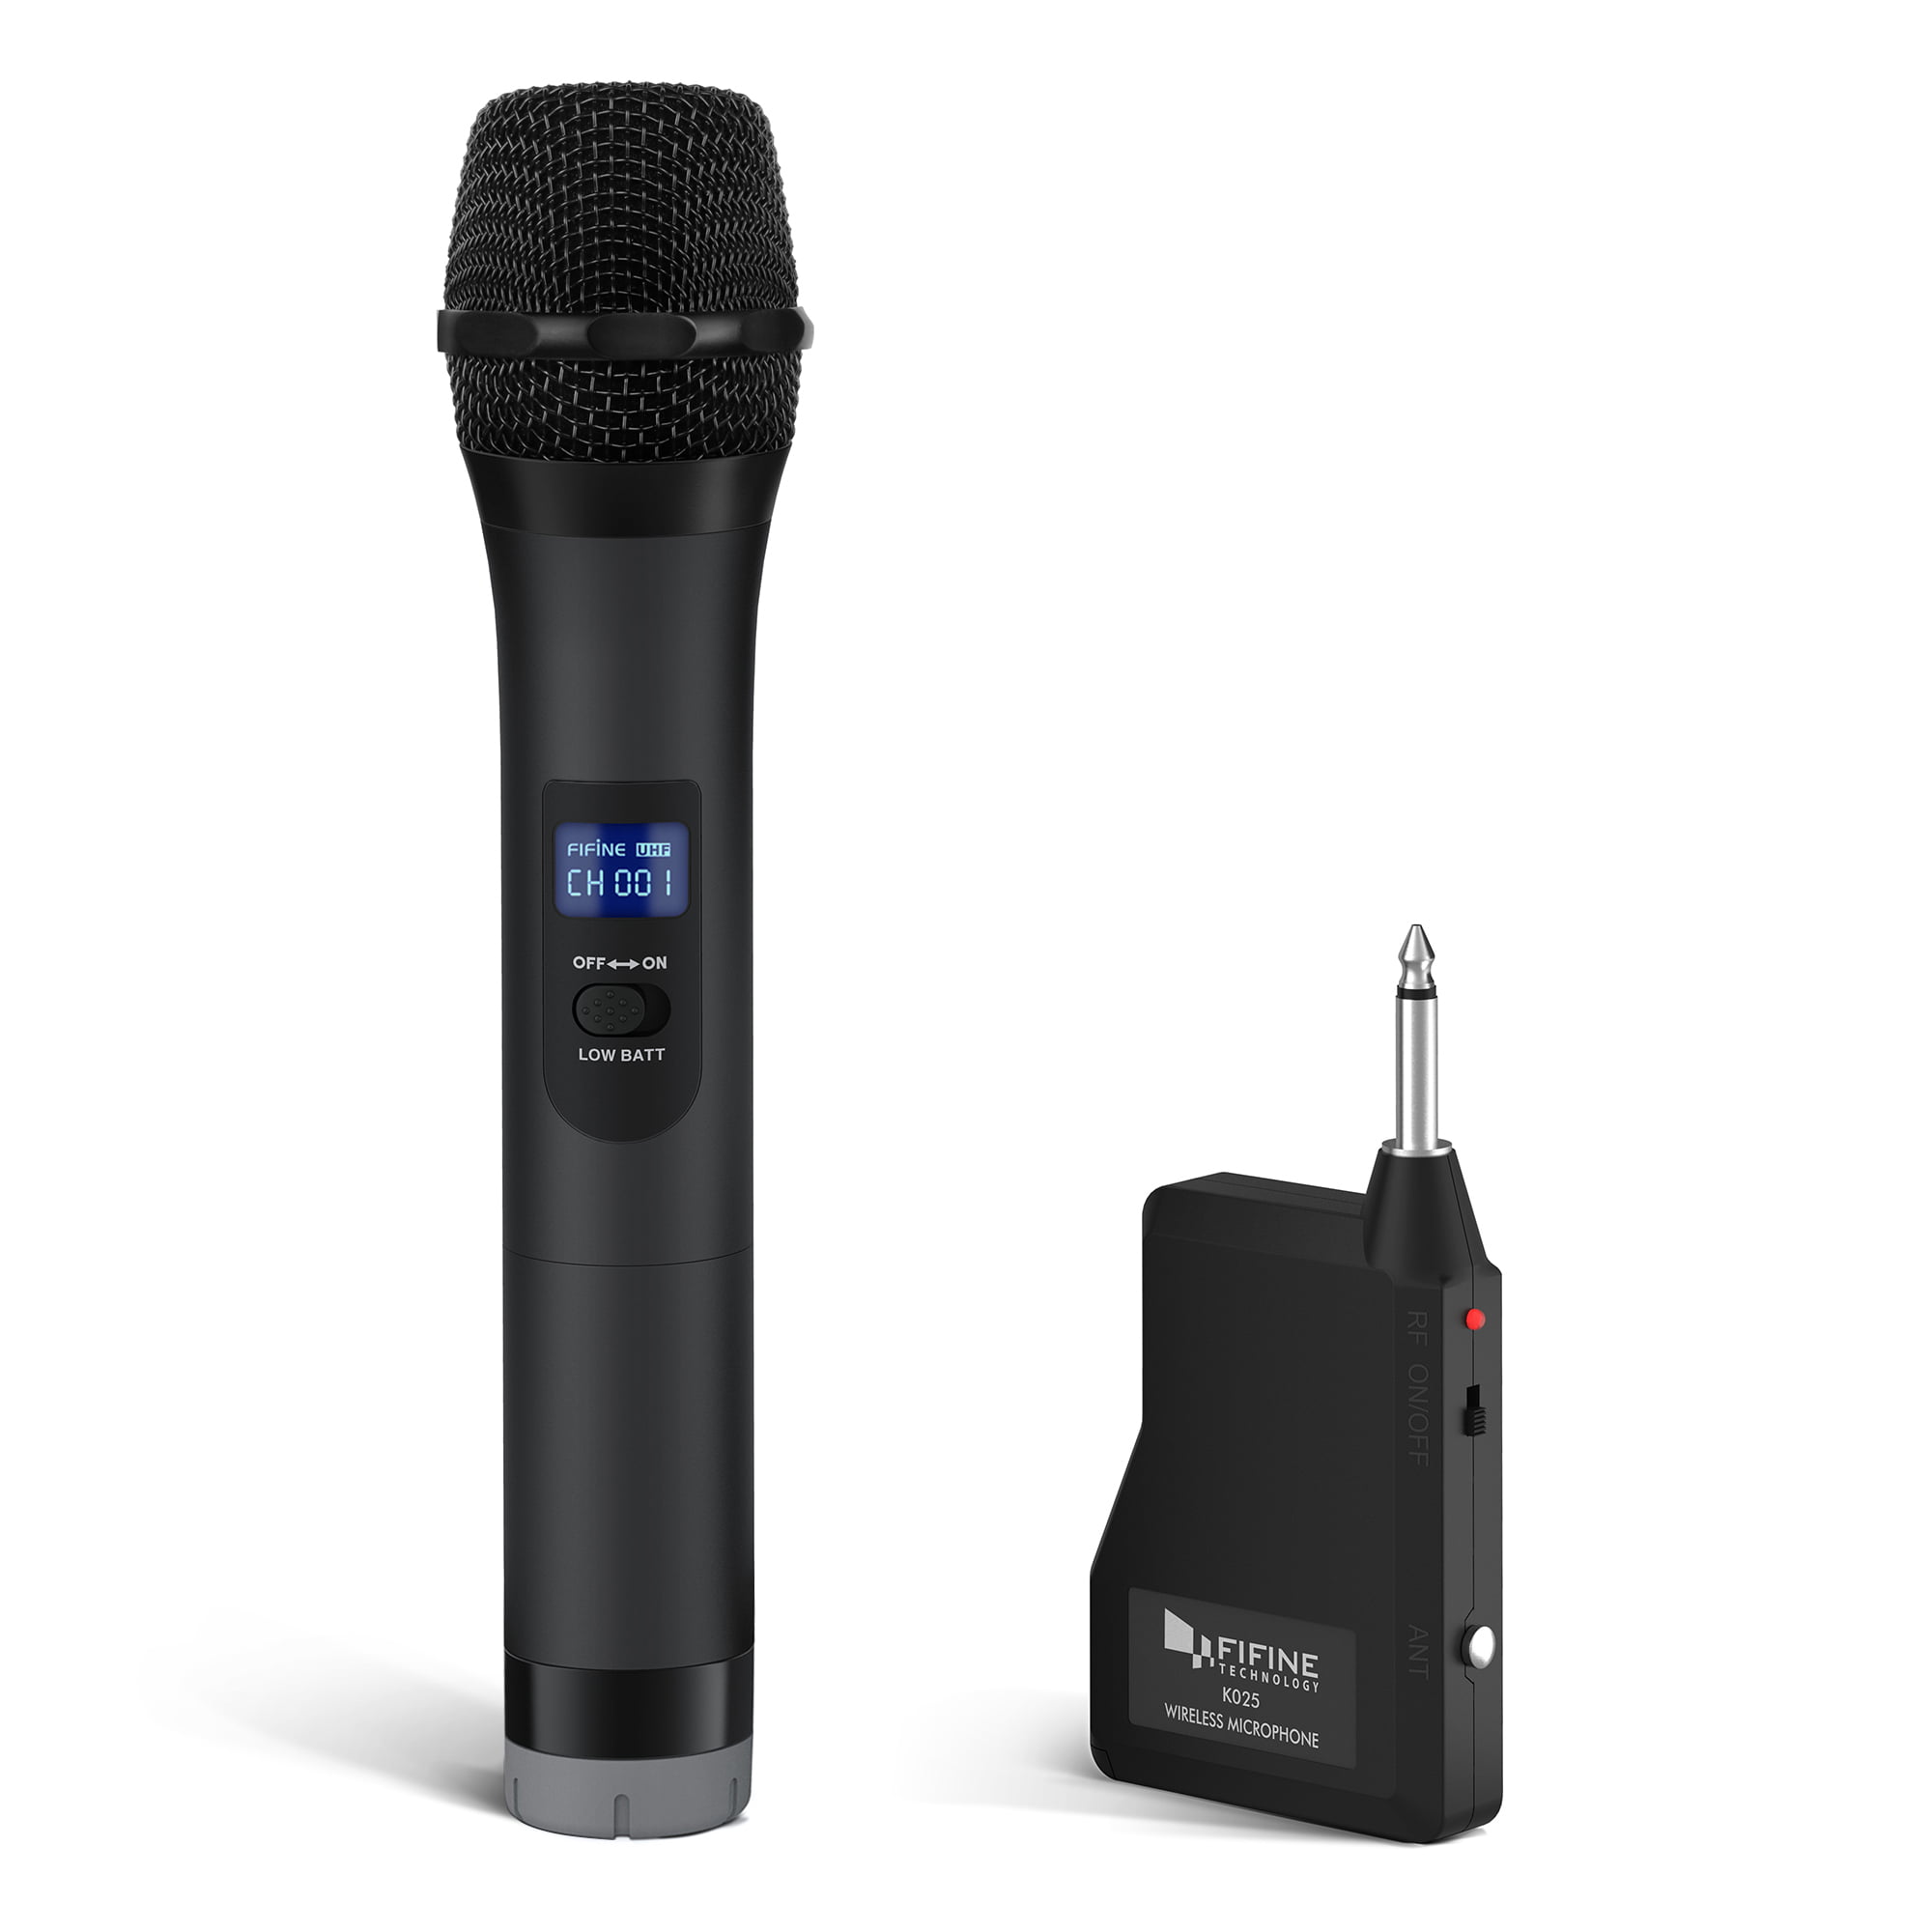 K025 Wireless Microphone,FIFINE Handheld Dynamic Microphone Wireless mic System for Karaoke Nights and House Parties to Have Fun Over the Mixer,PA System,Speakers.